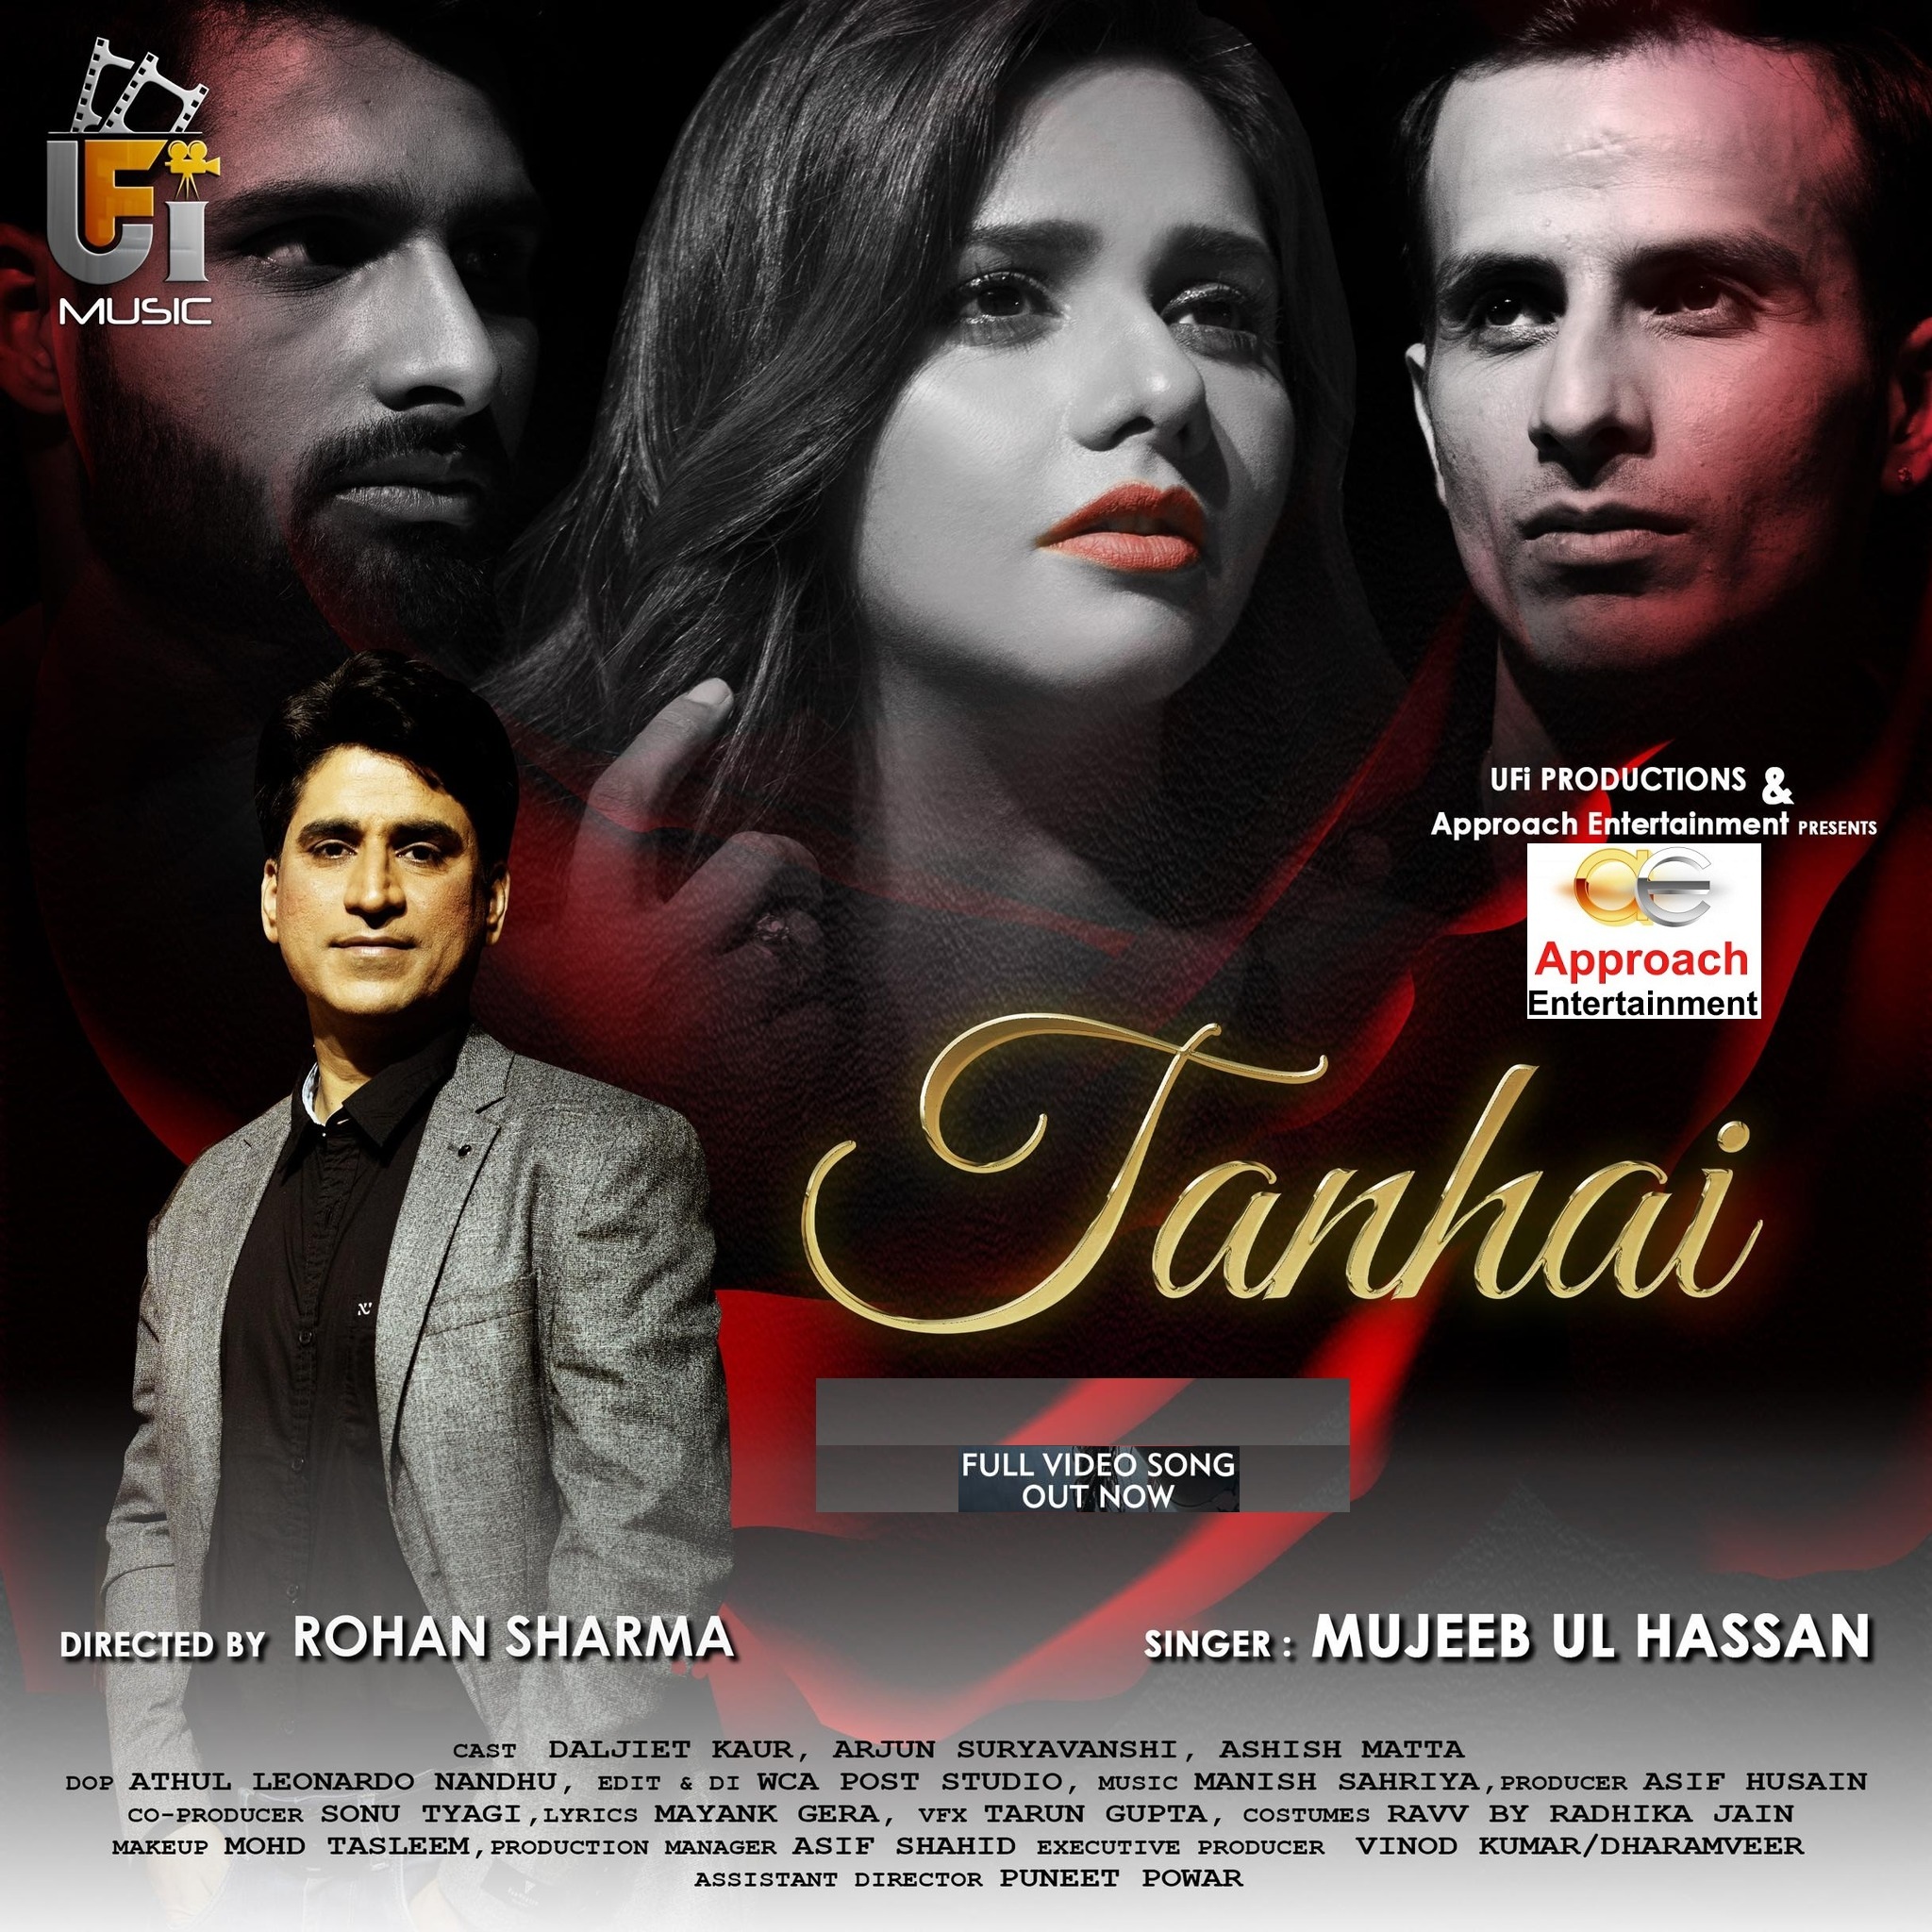 Approach Entertainment & UFI Productions Launch Singer Mujeeb Ul Hasan’s Much Awaited Music Video Tanhai